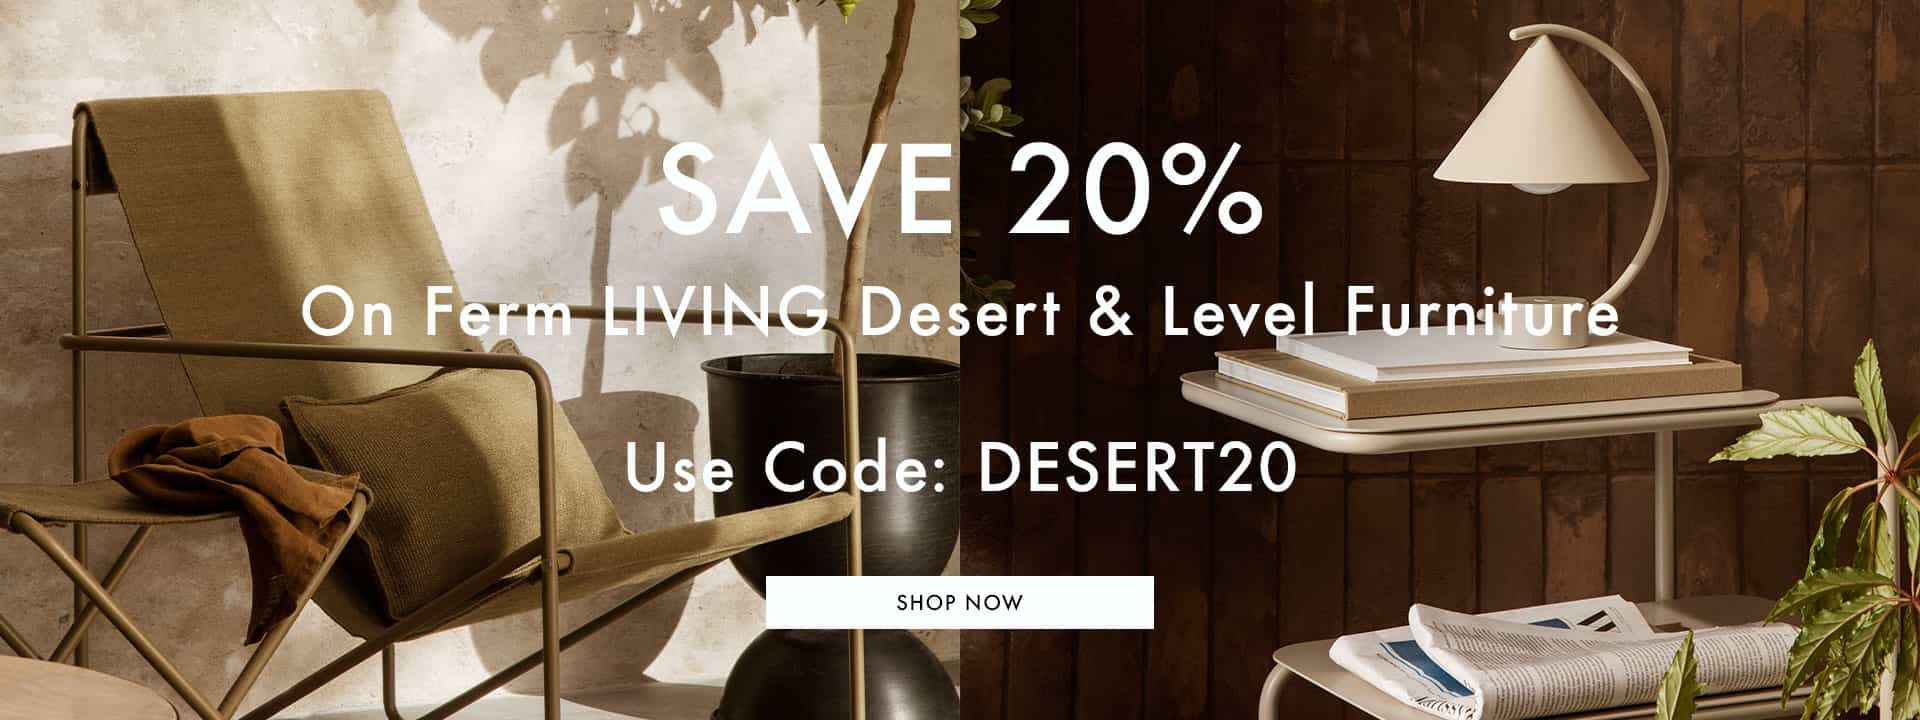 Design Stuff extra 20% OFF on Ferm living desert & level furniture with discount code